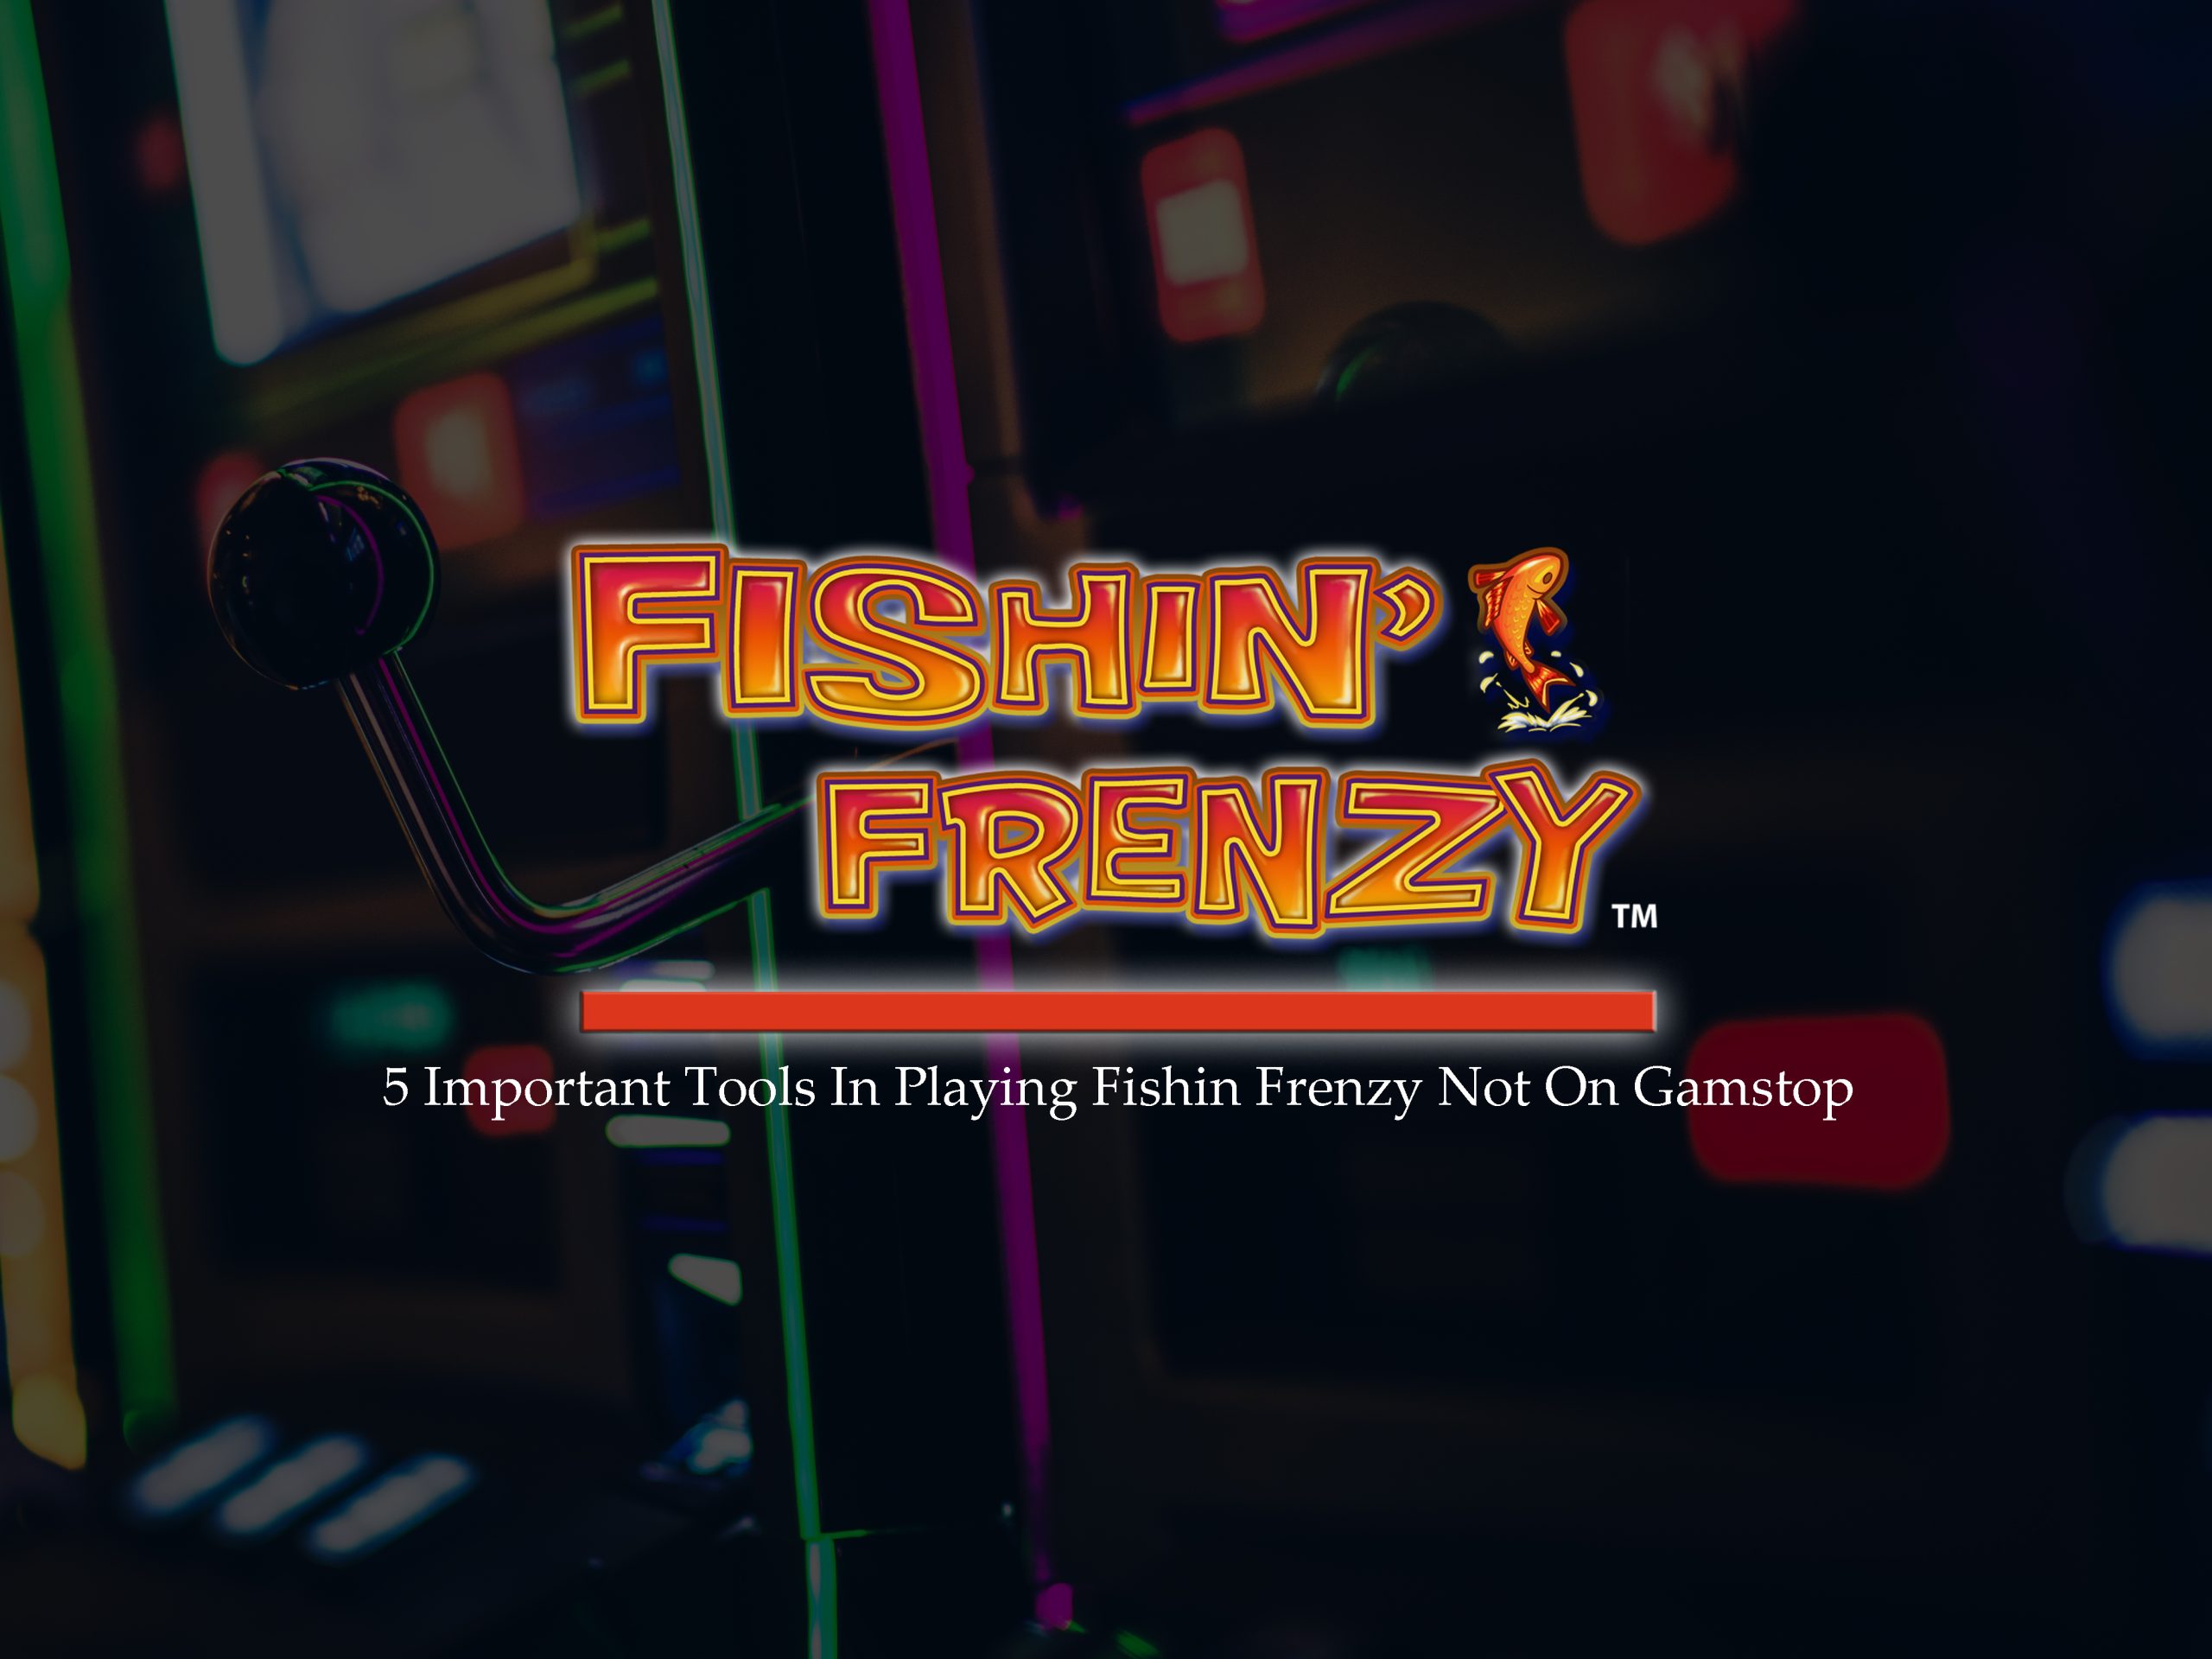 5 Important Tools In Playing Fishin Frenzy Not On Gamstop